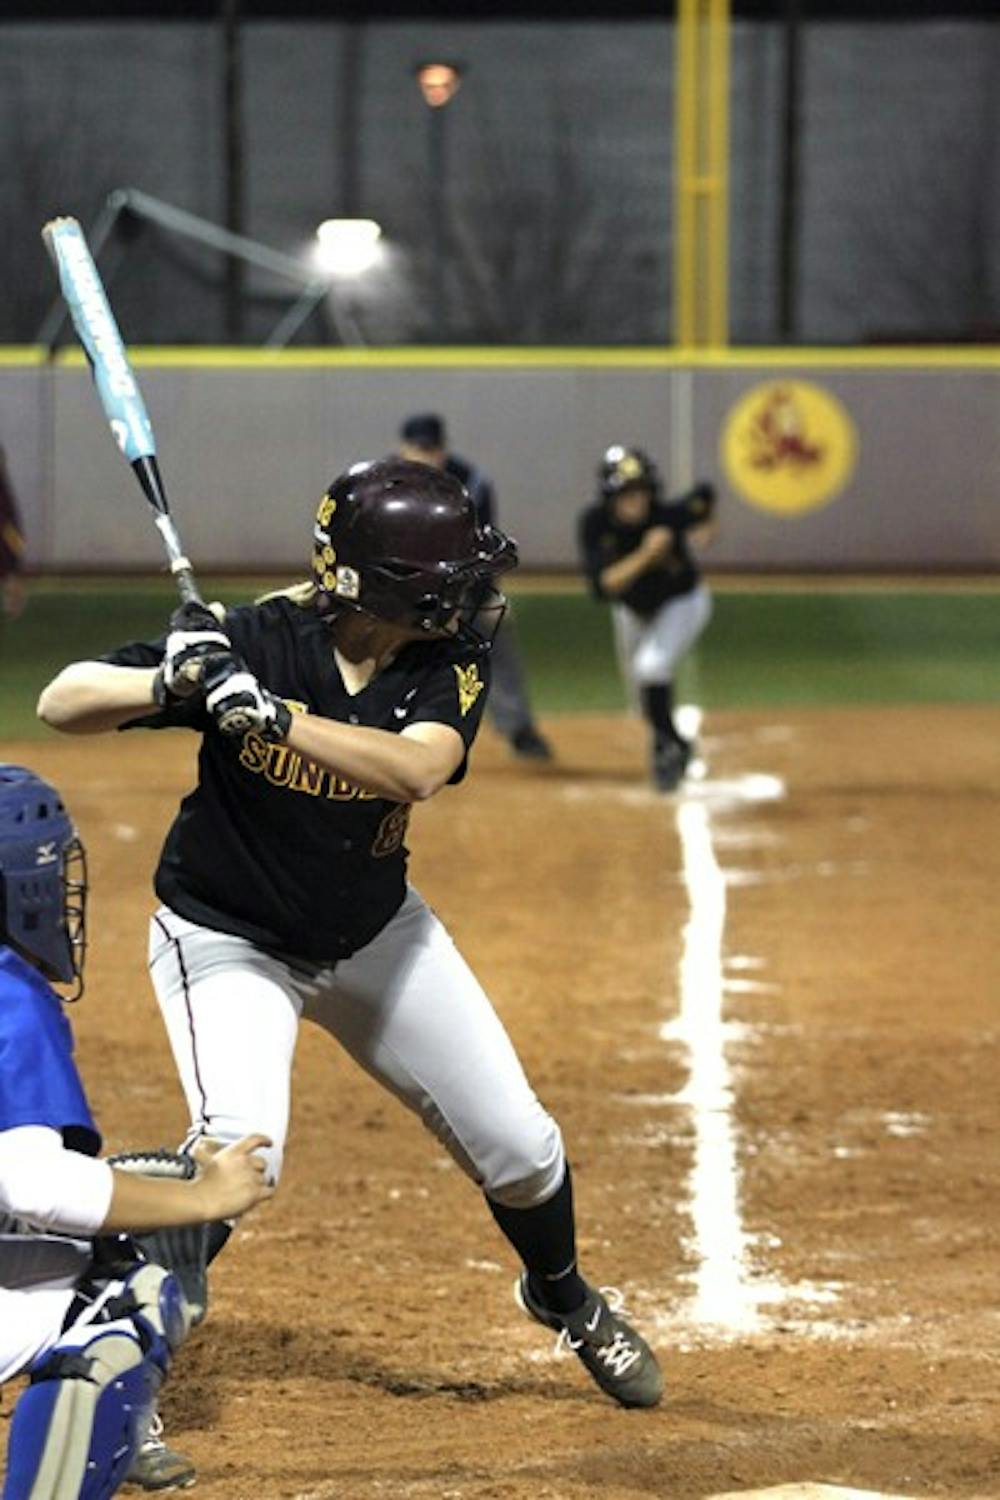 Senior outfielder Annie Lockwood bats in the Kajikawa Classic on Thursday. Lockwood and the Sun Devils easily beat their first two opponents of the tournament. (Photo by Sam Rosenbaum)